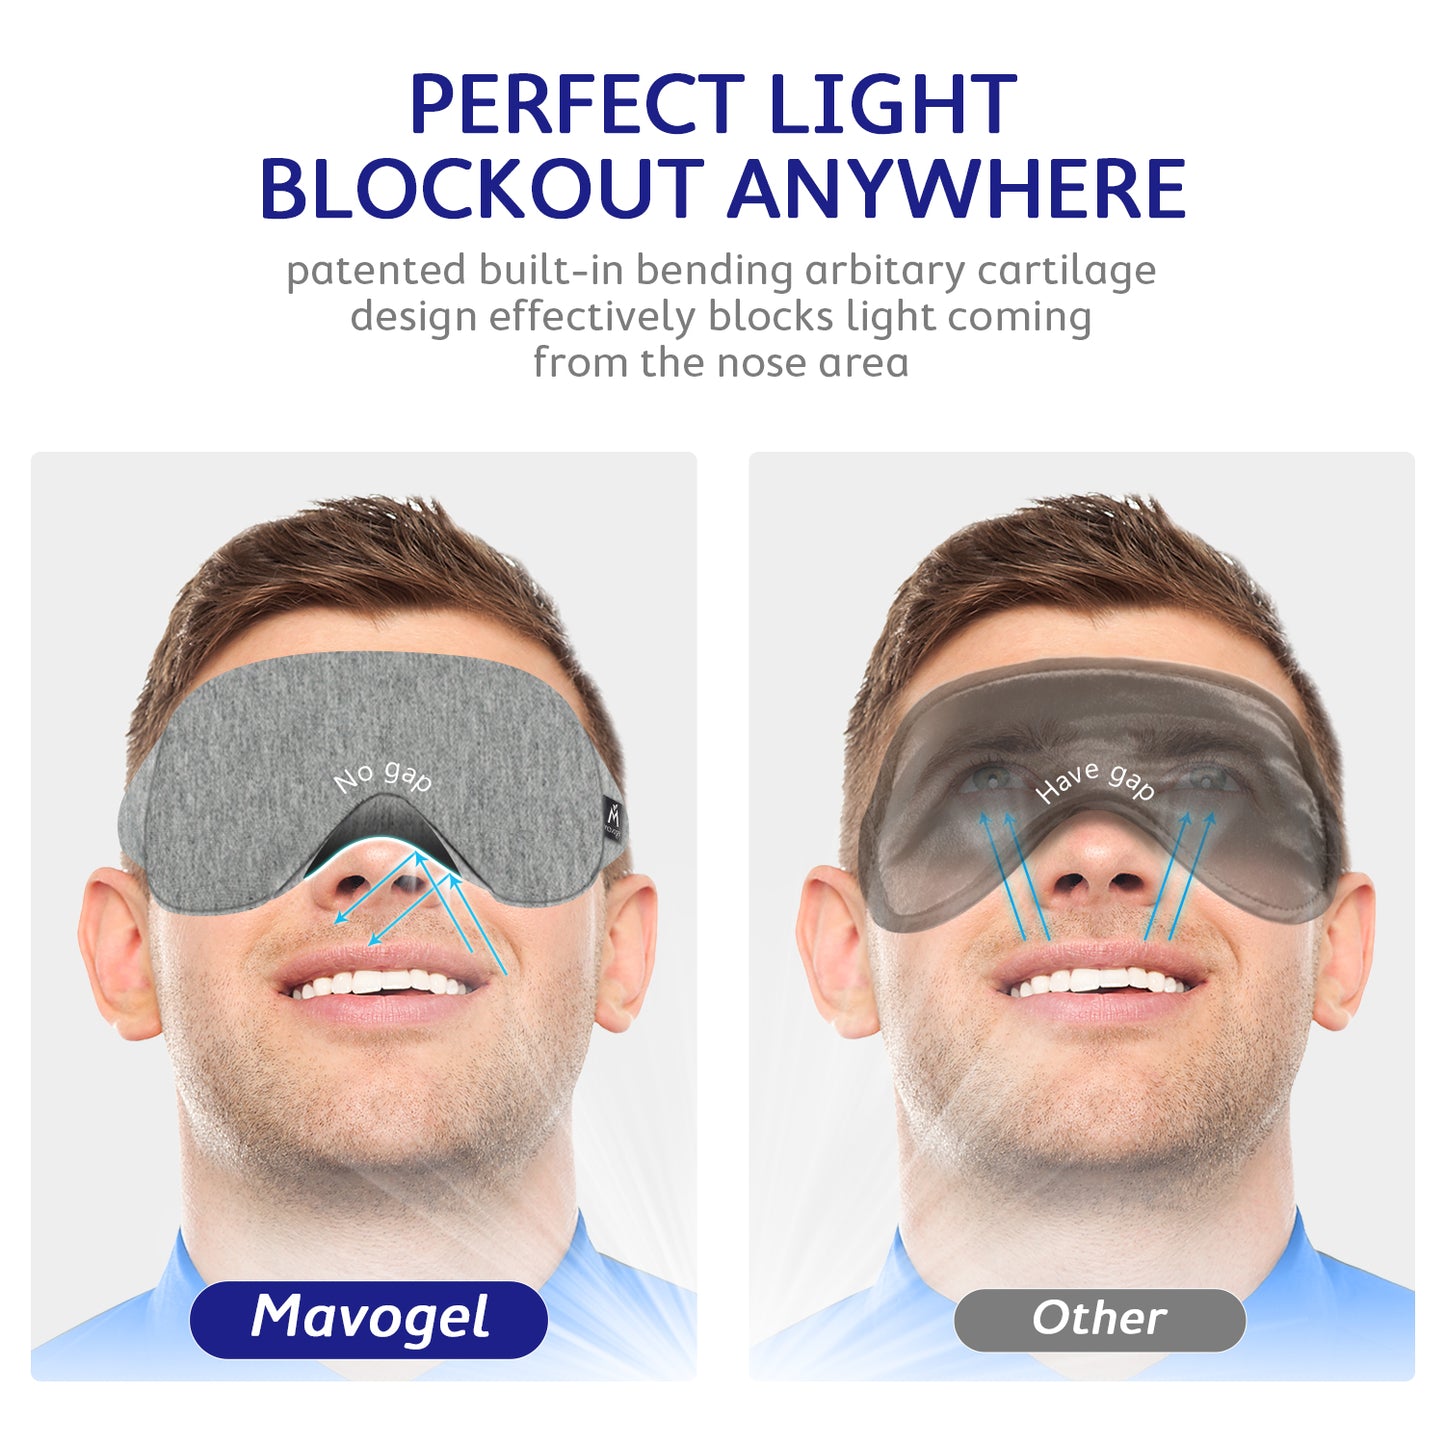 Mavogel Cotton Sleep Mask - Light Blocking Soft and Comfortable Night Eye Mask, Includes Travel Pouch (Grey)